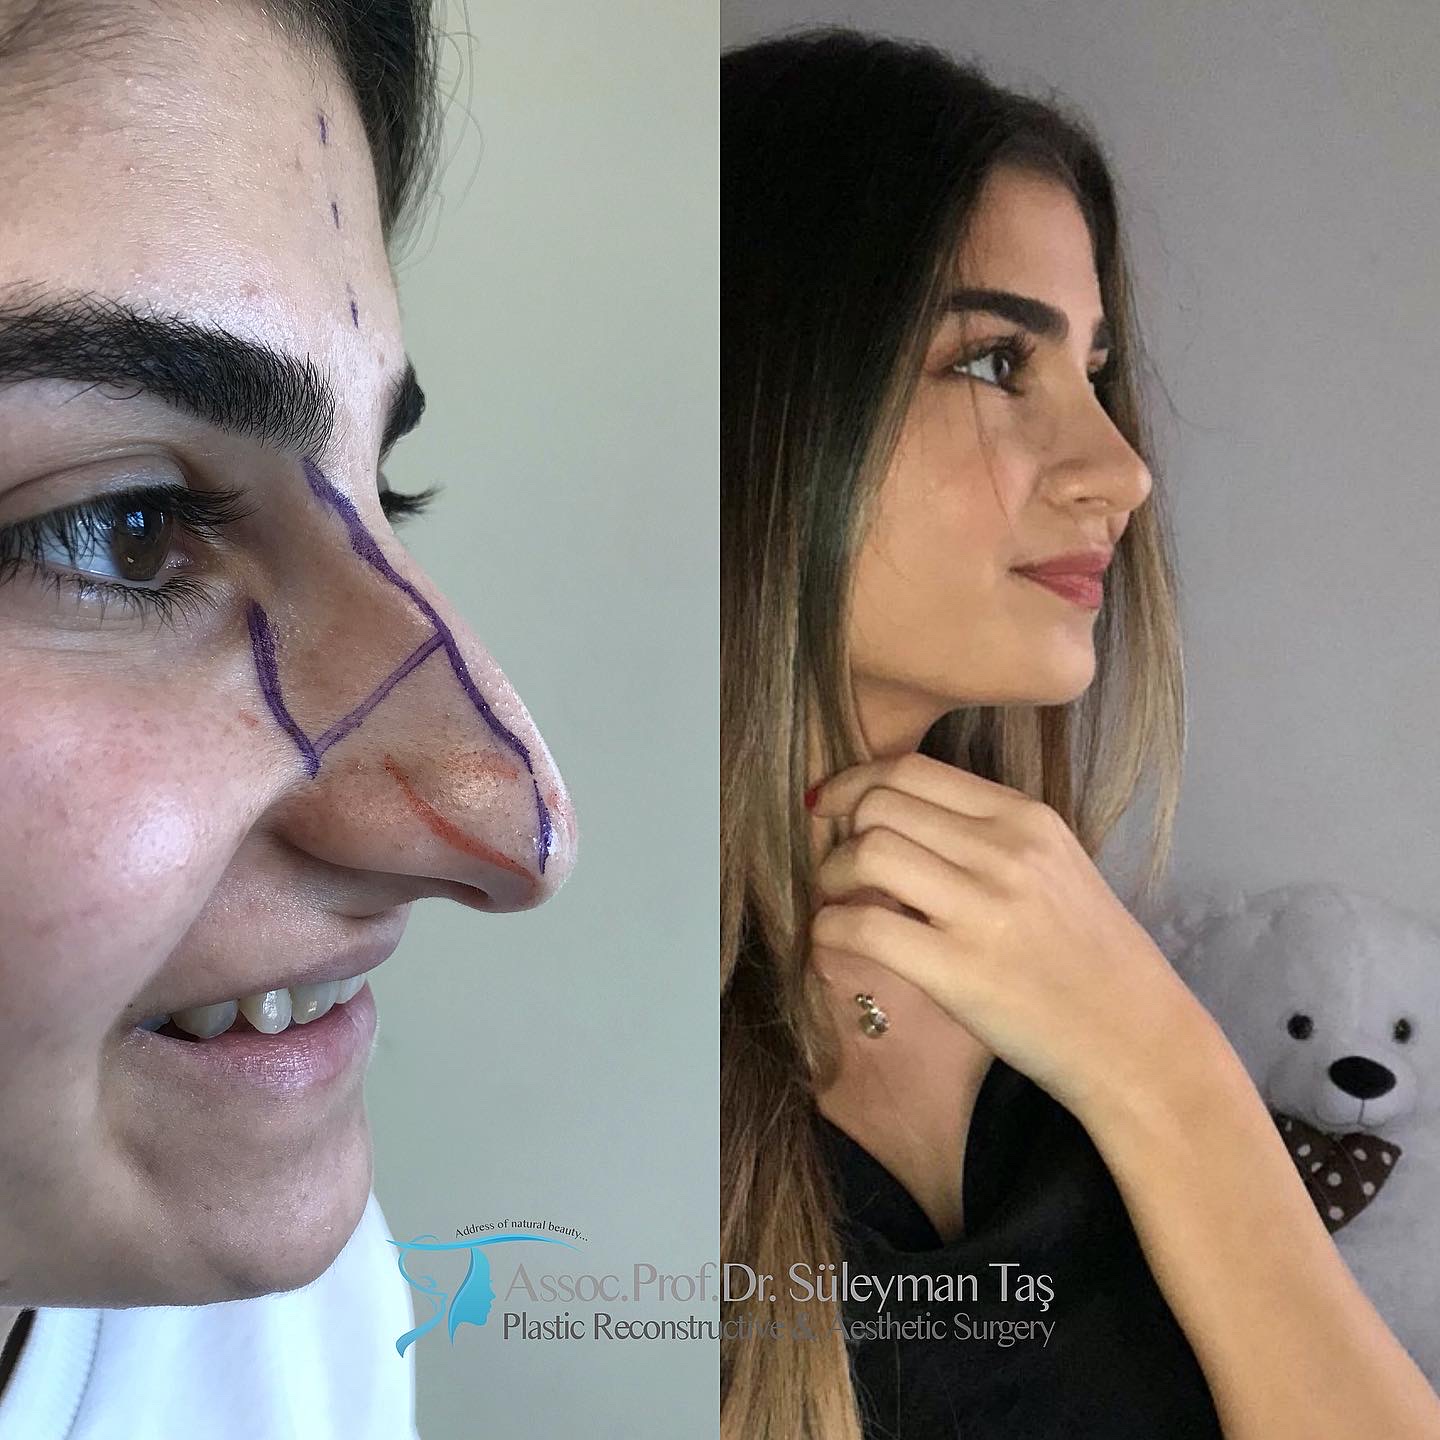 How much is the price of rhinoplasty?